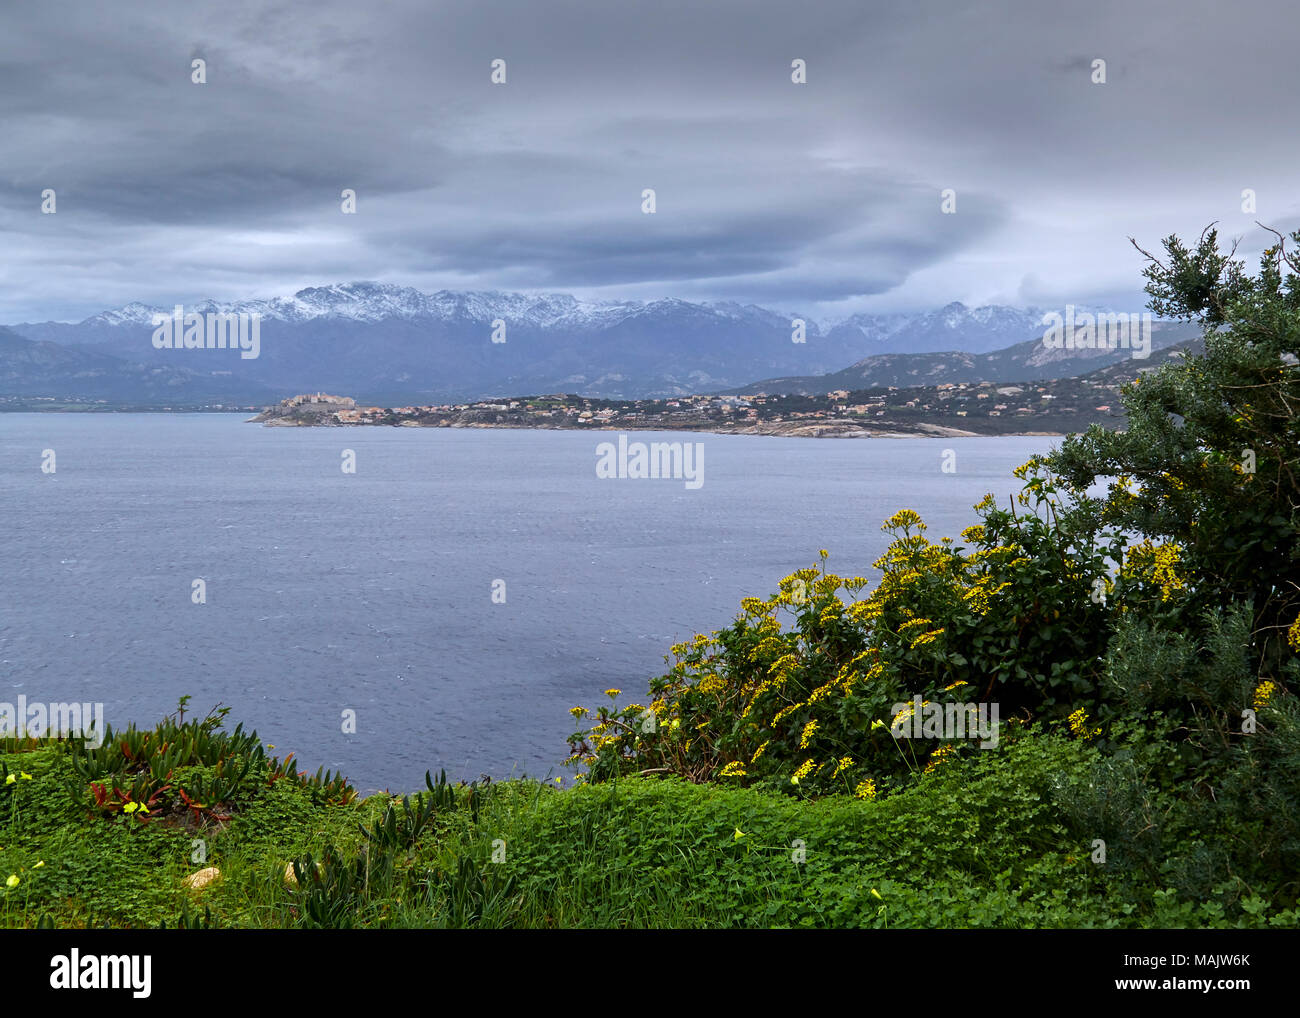 View across bay to the North West of Calvi, Corsica, Corse, France Stock Photo